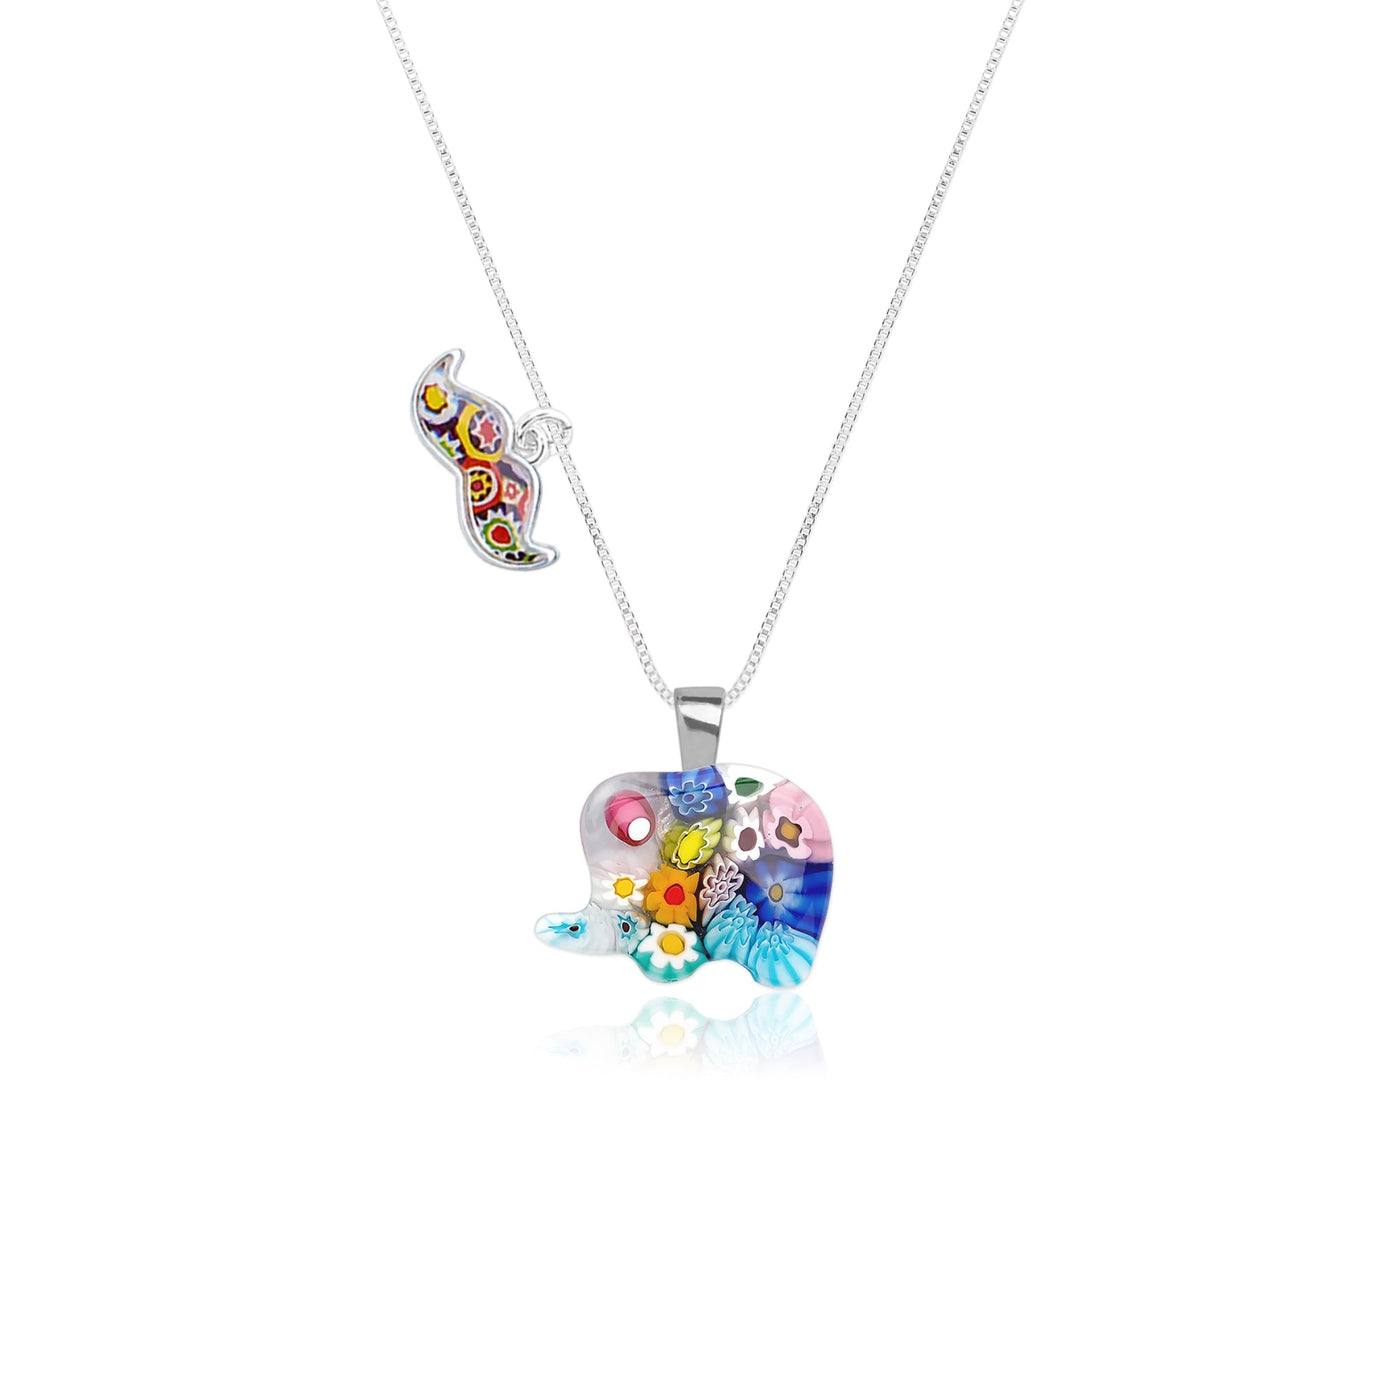 Elephant in Bloom Necklace - 0.85mm 925 Sterling Silver - Pendant Necklace